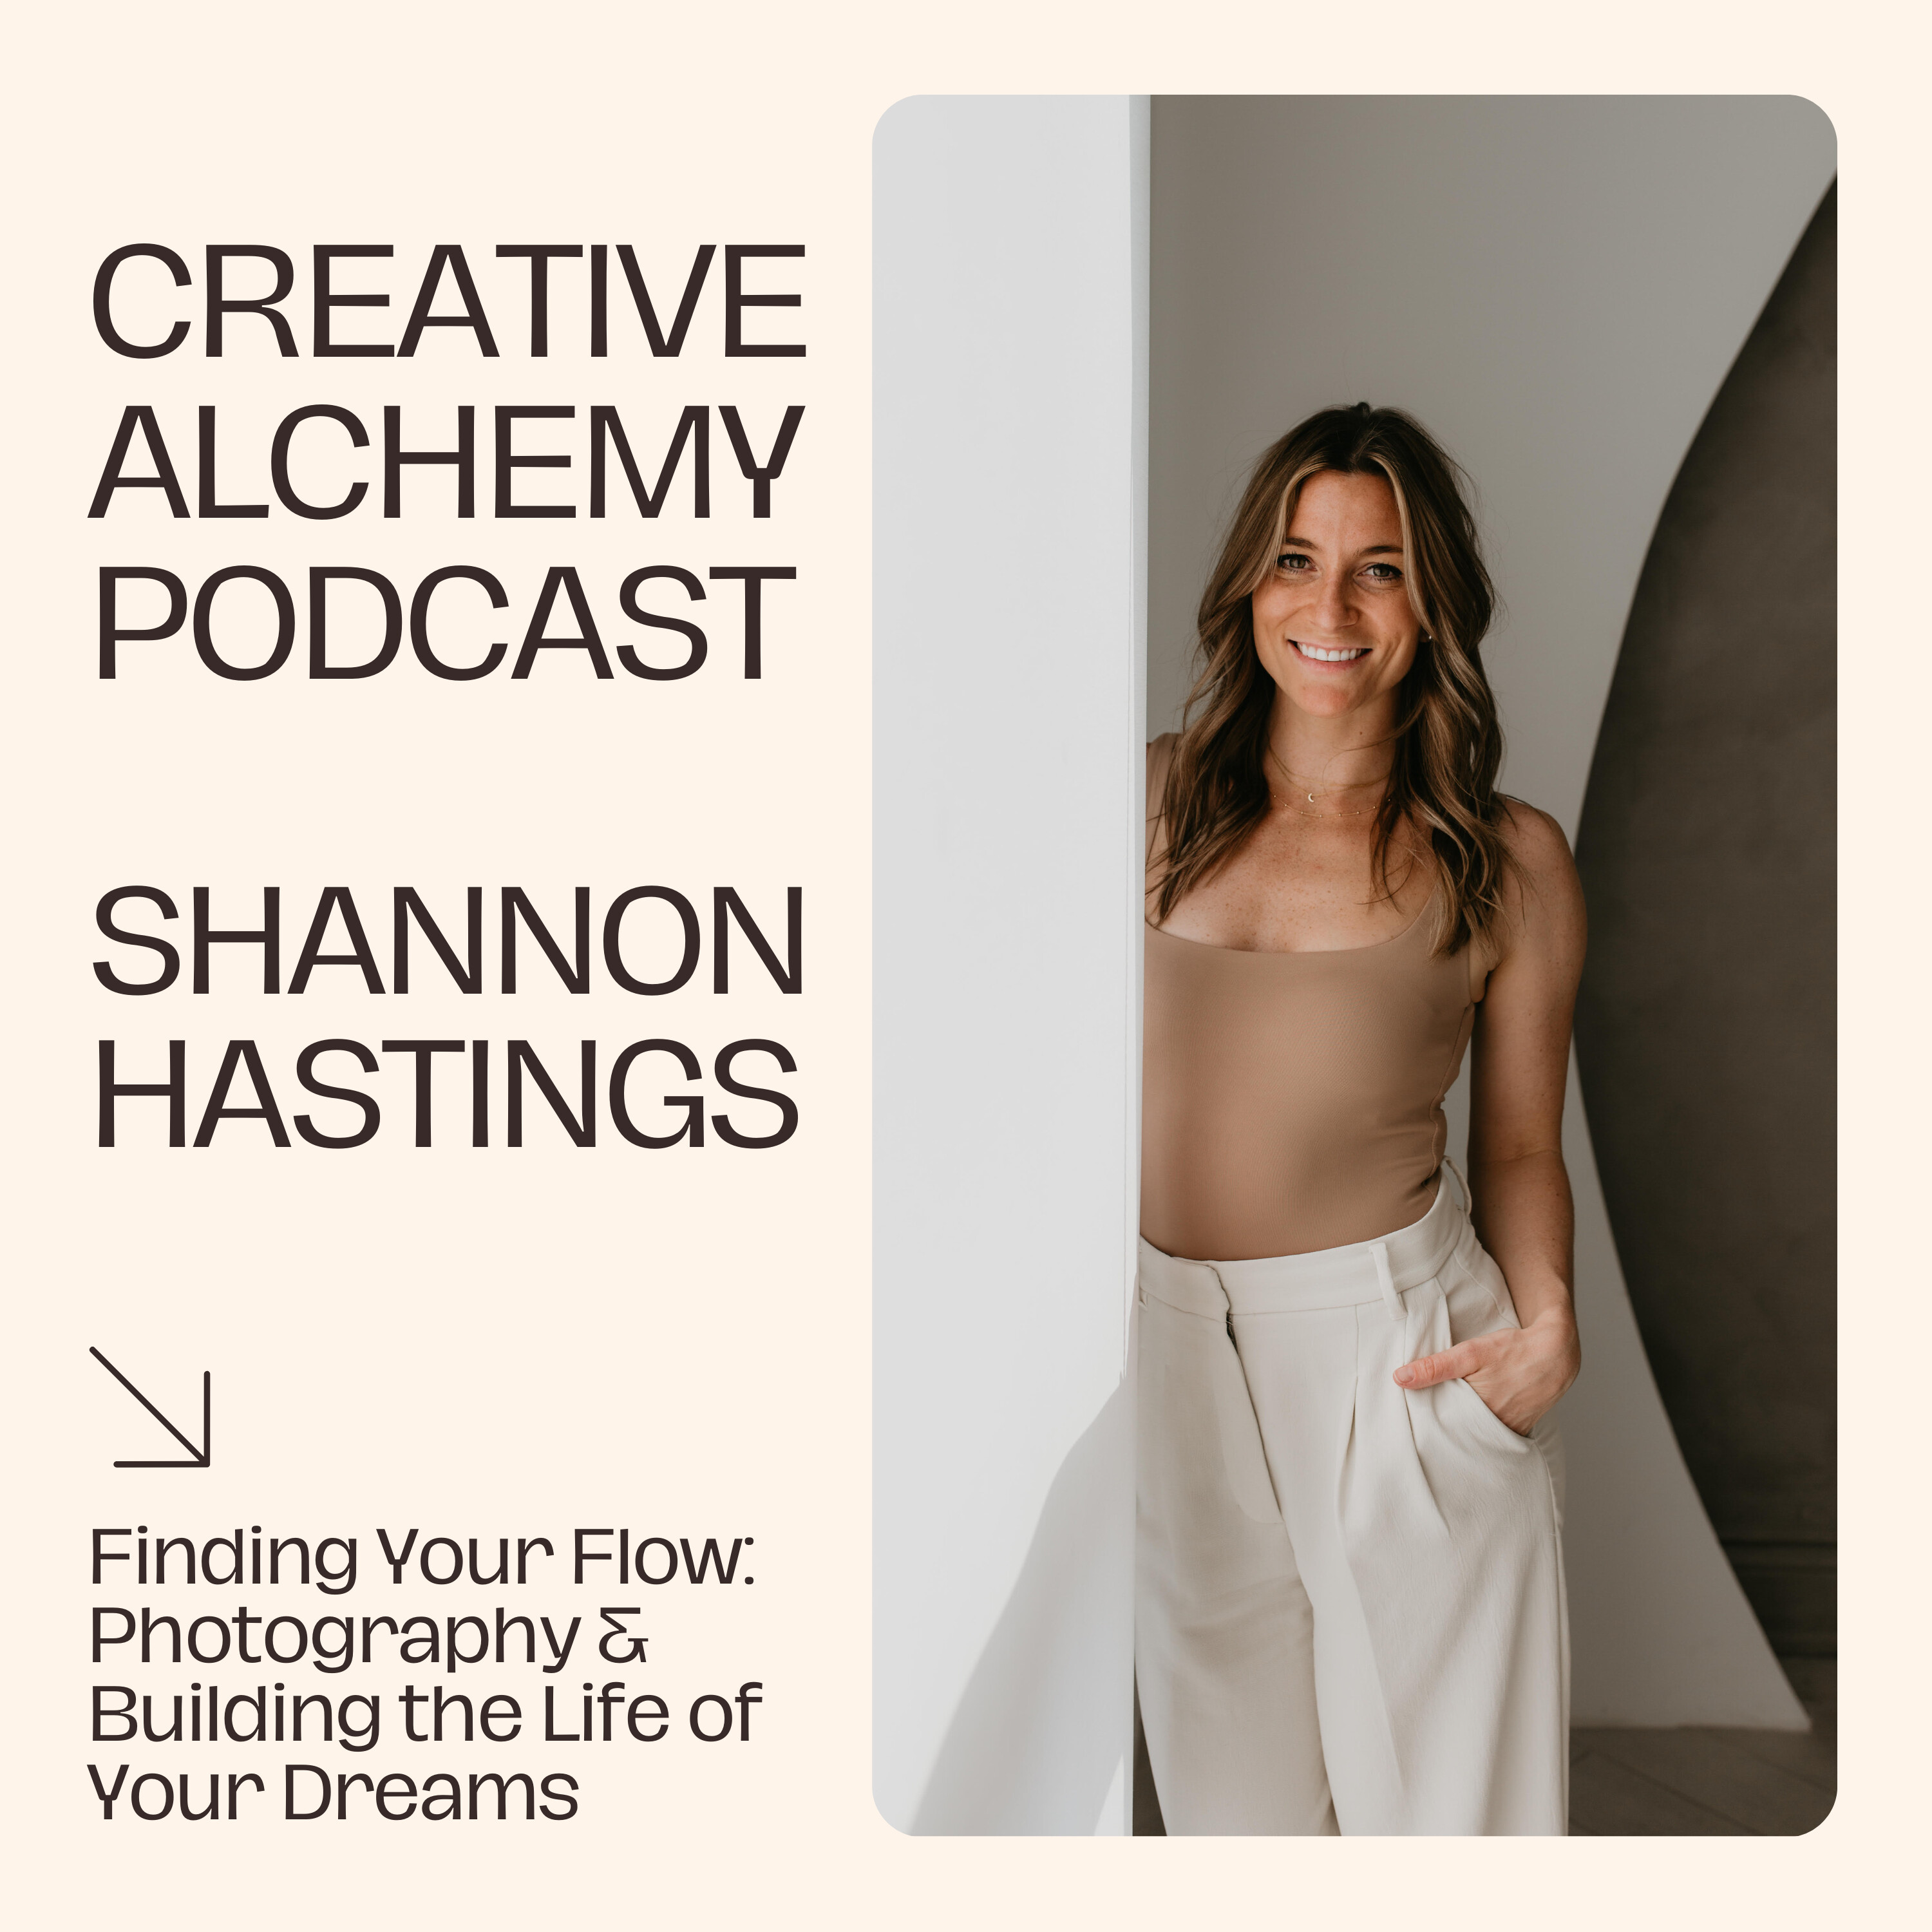 Finding Your Flow: Photography & Building the Life of Your Dreams with Shannon Hastings Image